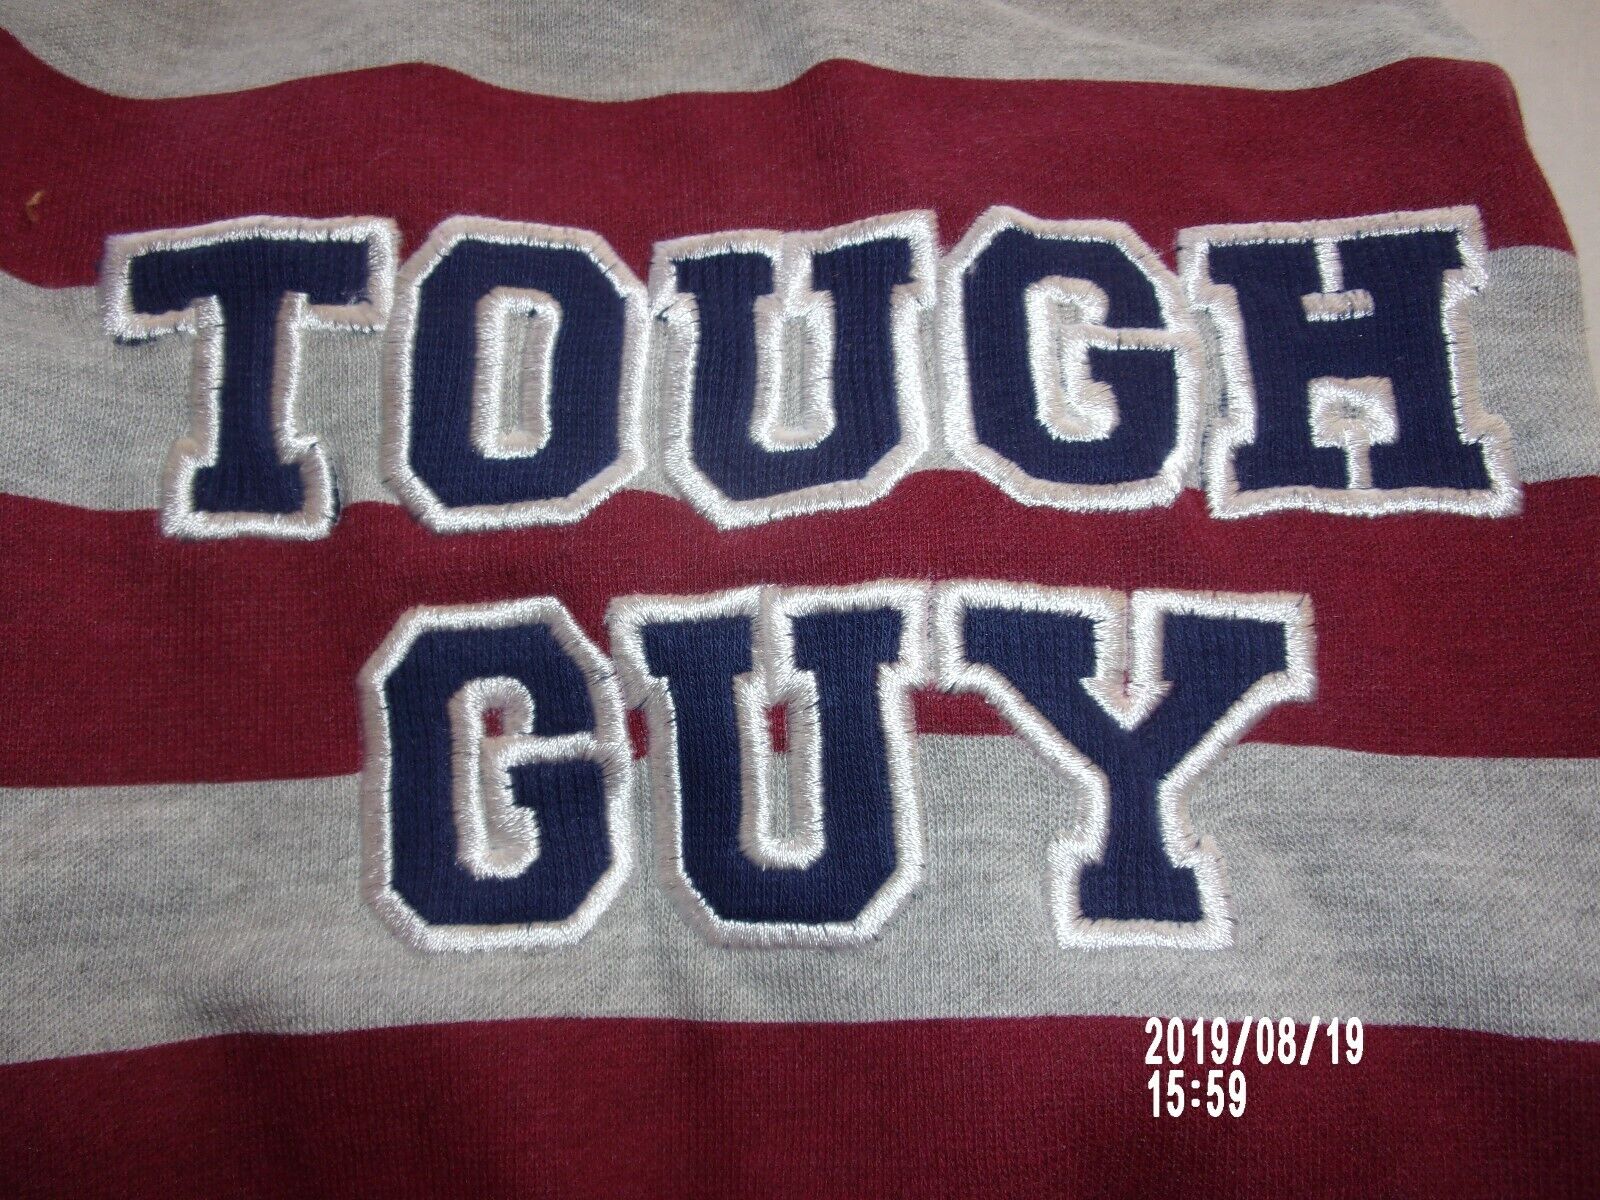 TOUGH GUY Striped Hoodie Jacket Pet Dog Cat Wag-a -tude S new small